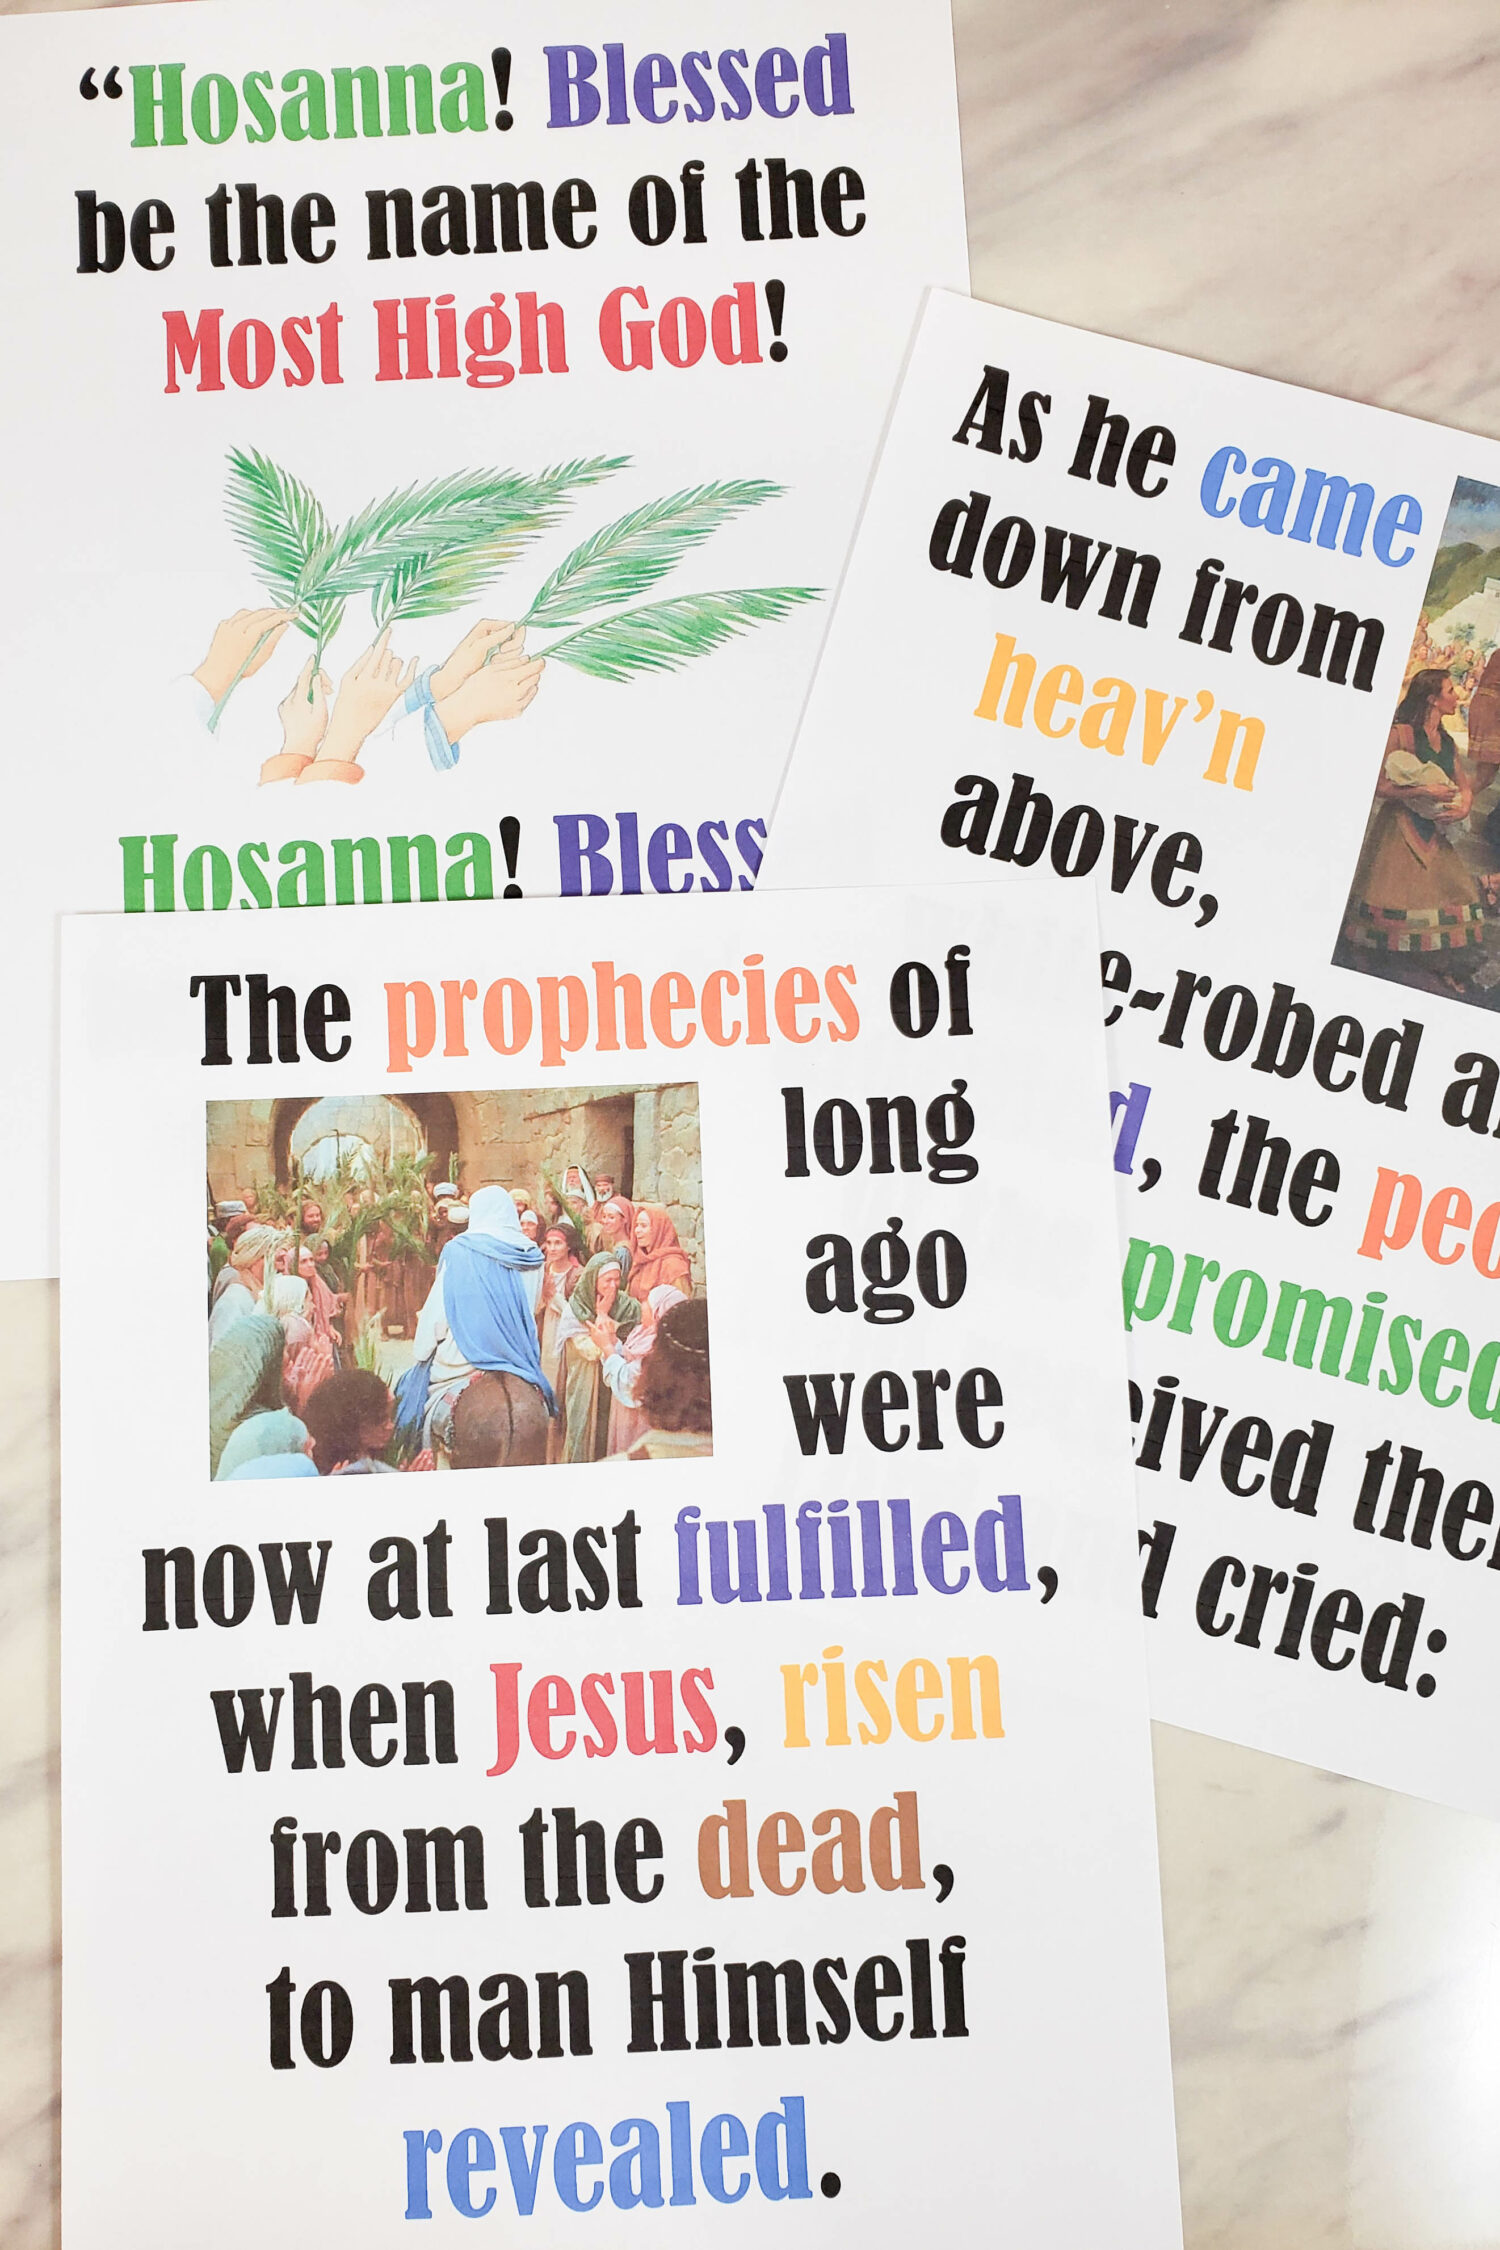 Easter Hosanna Flip Chart singing time visual aids helps for LDS Primary music leaders to teach this beautiful song for Easter or any time of the year. Part of the Book of Mormon Come Follow Me study song list.